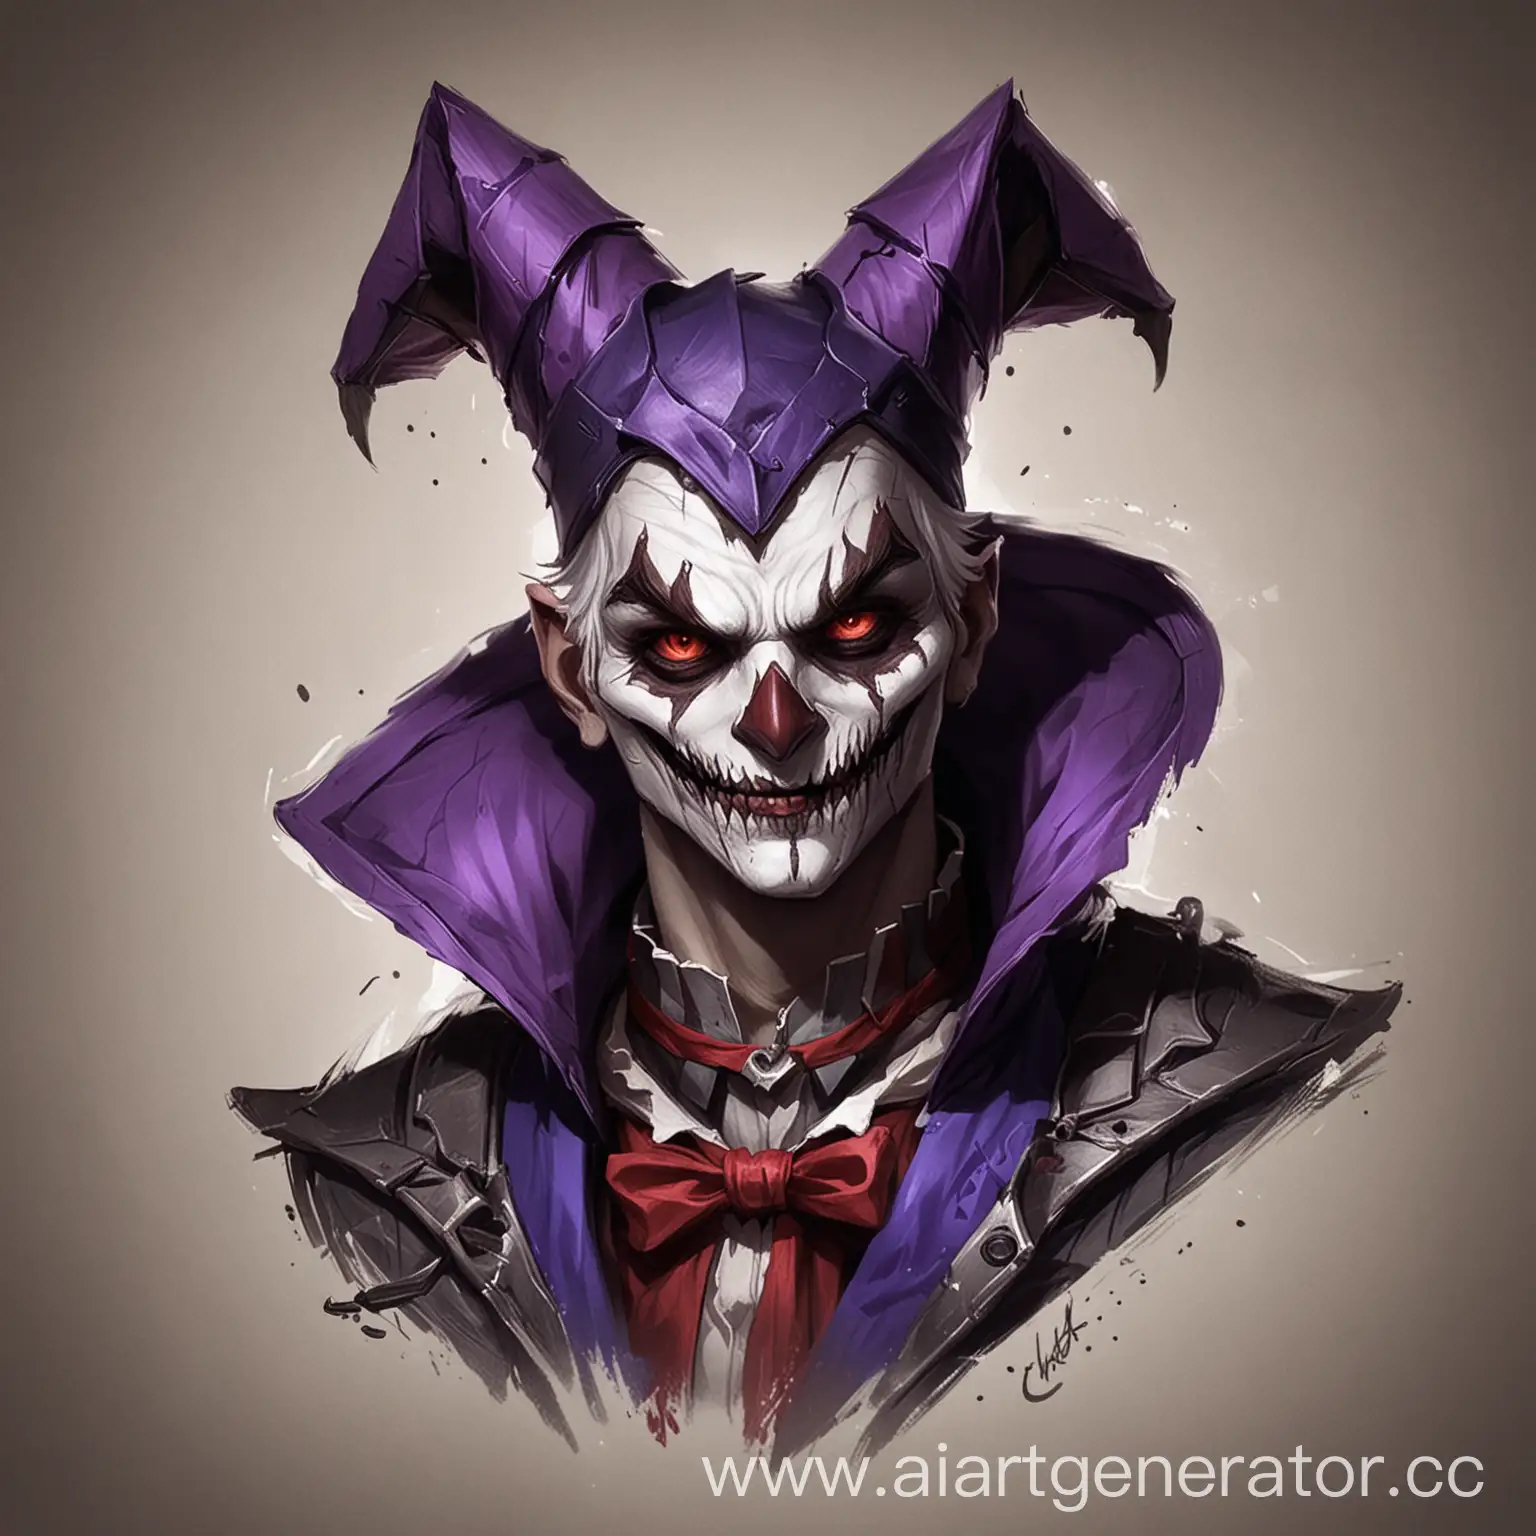 Shaco-Main-from-League-of-Legends-in-MischiefFilled-Action